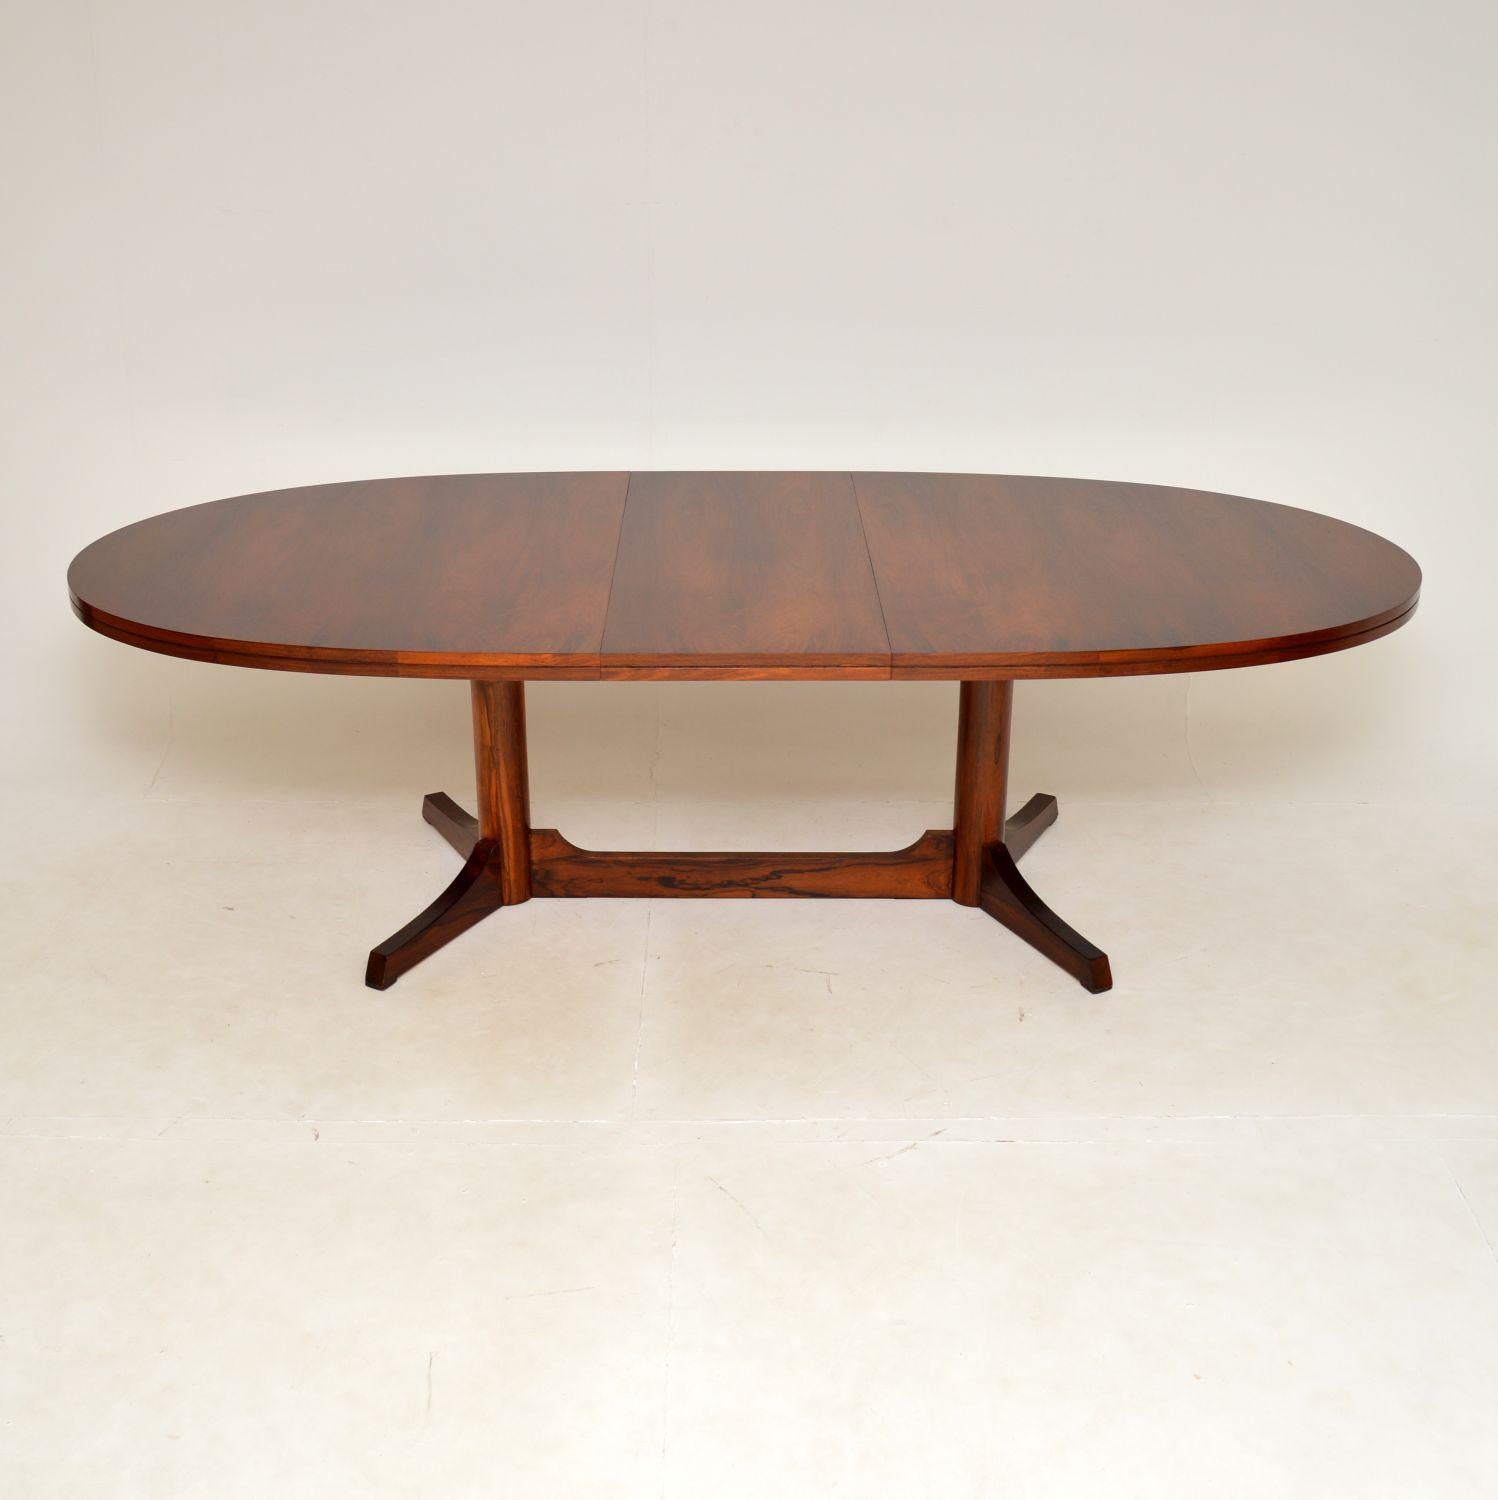 British 1960s Vintage Dining Table by Robert Heritage for Archie Shine